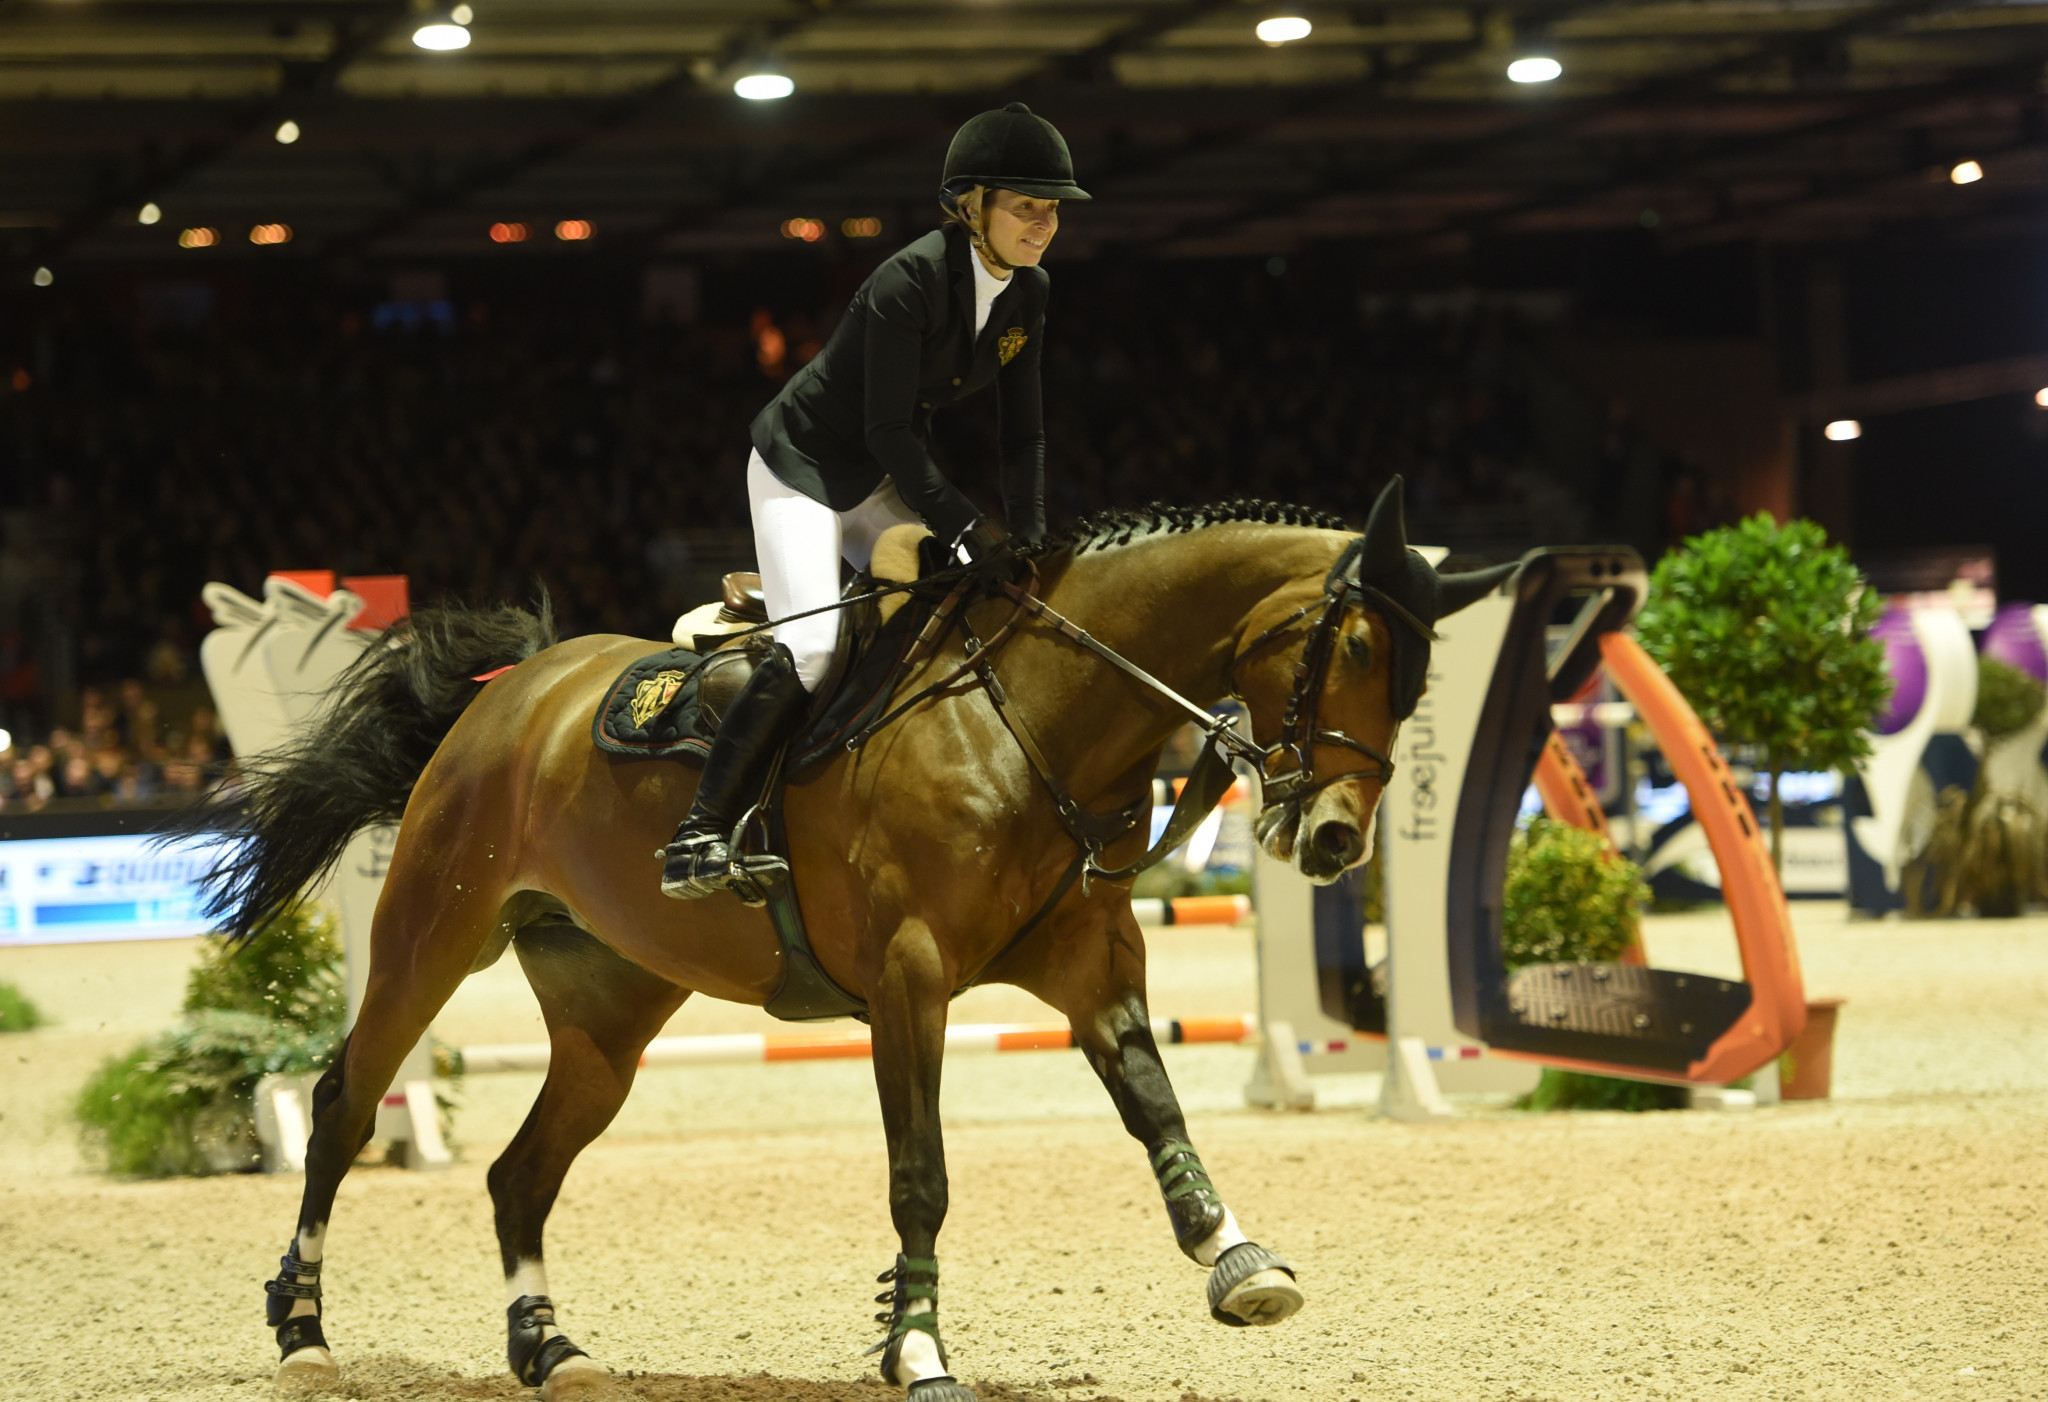 Edwina Tops-Alexander produced a fine ride but it was not enough to steer Valkenswaard United to glory ©Getty Images